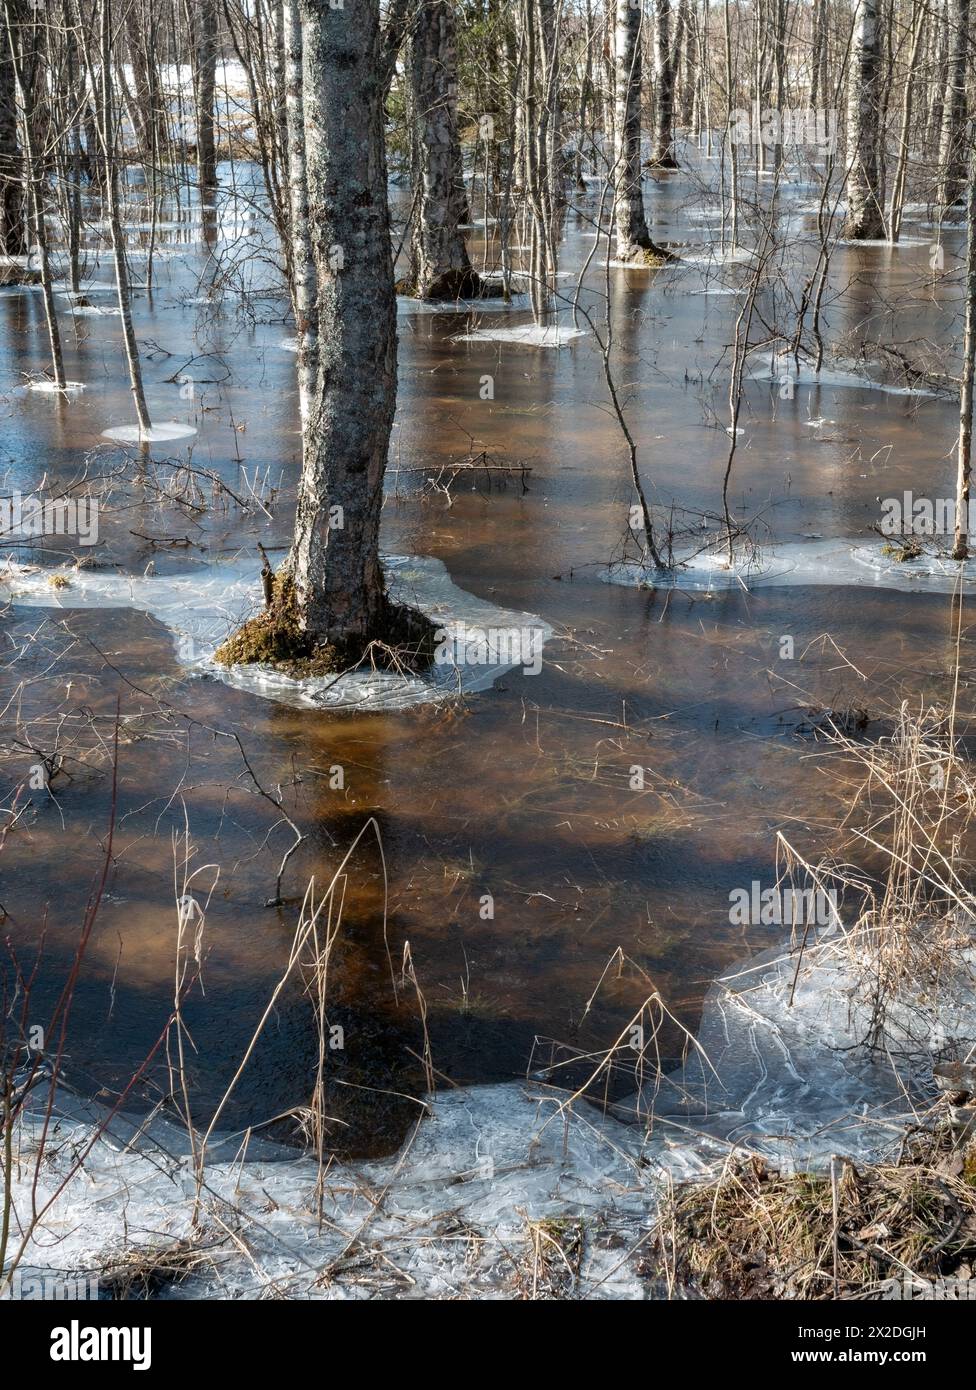 Floods and ice in a springtime forest in Kempele, Finland Stock Photo